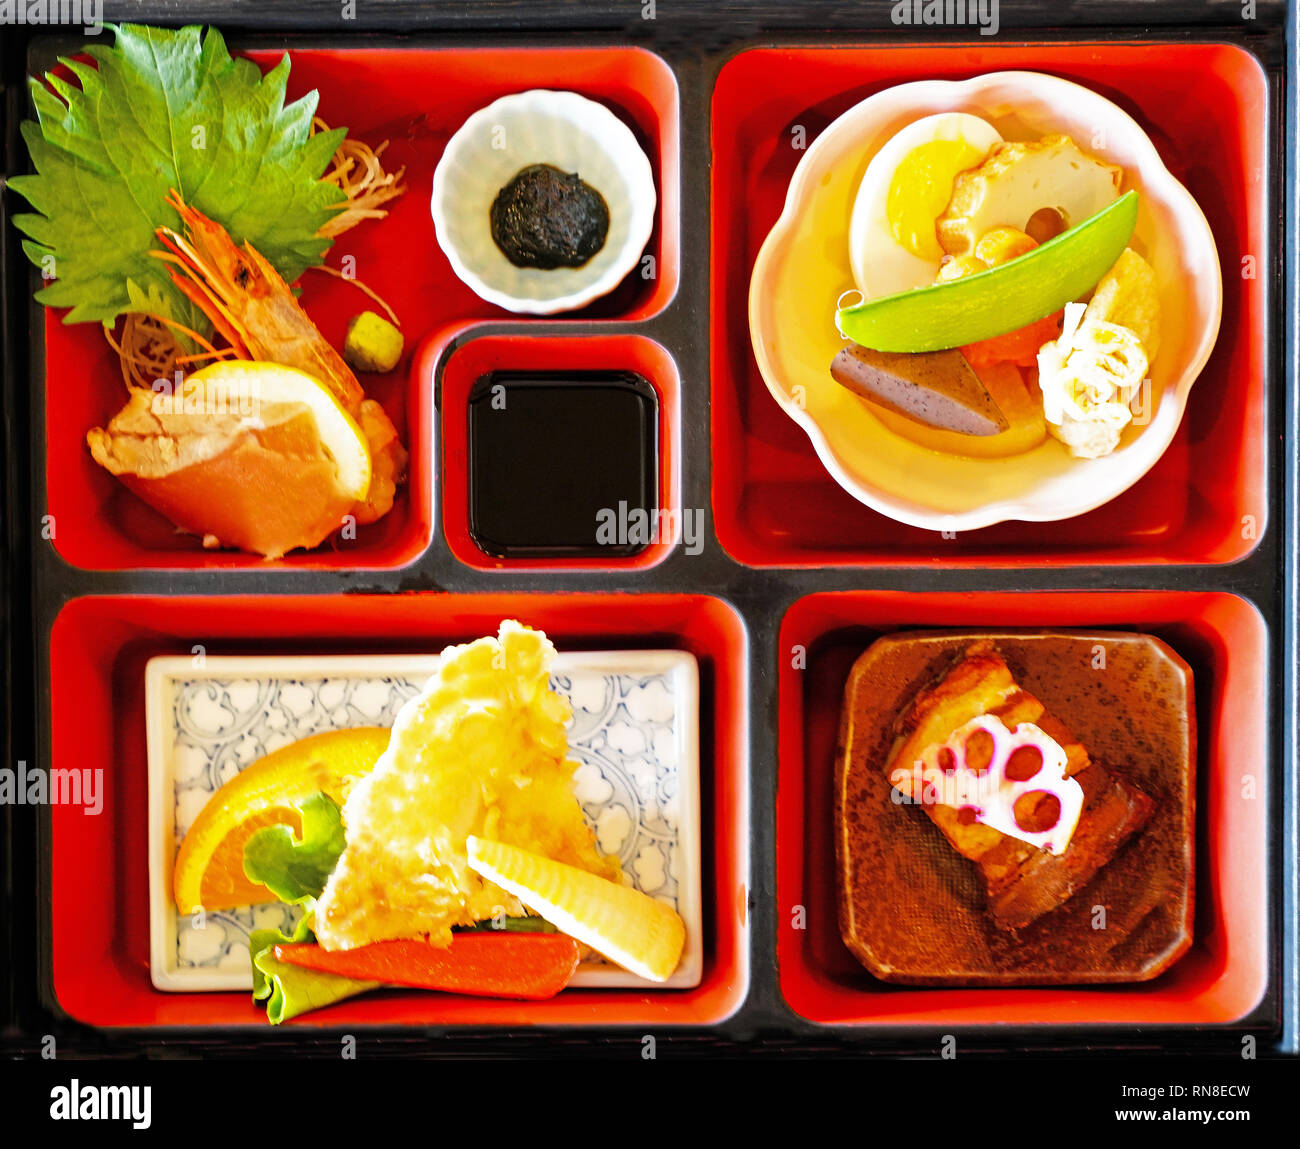 https://c8.alamy.com/comp/RN8ECW/traditional-wooden-japanese-bento-box-with-lunch-foods-RN8ECW.jpg